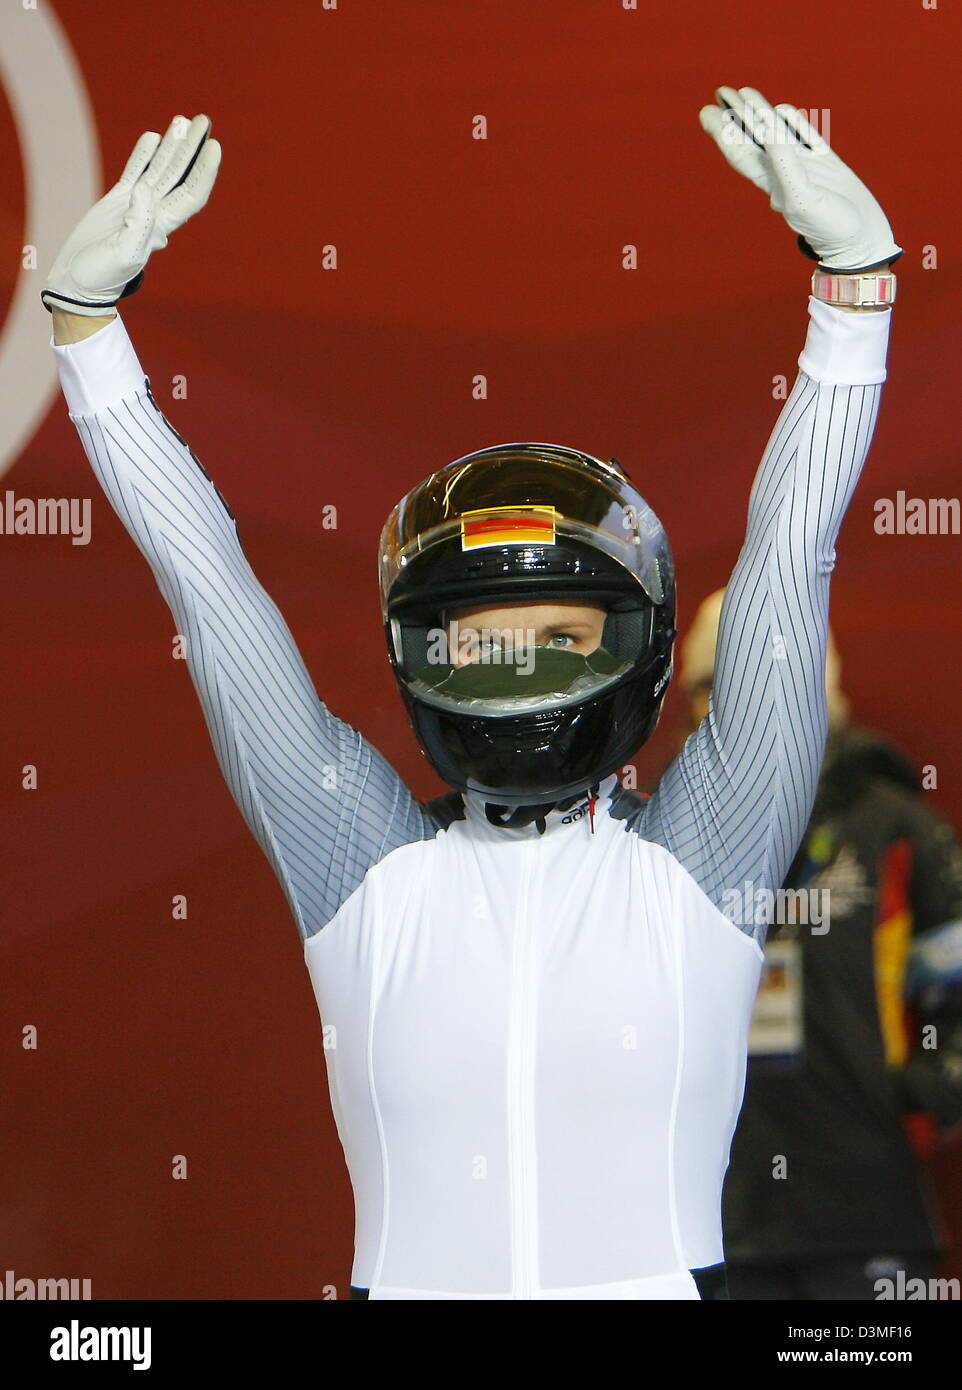 German bobsleigher Sandra Kiriasis raises her arms and waves still wearing her helmet after taking the lead in the third heat of the  Women's Double Bobsleighing event on the Olympic Toboggan run at the Turin Winter Olympics in Cesana Pariol, Italy, Tuesday, 21 February 2006. Kiriasis and her teammate Anja Schneiderheinze eventually won gold. Photo: Arne Dedert Stock Photo